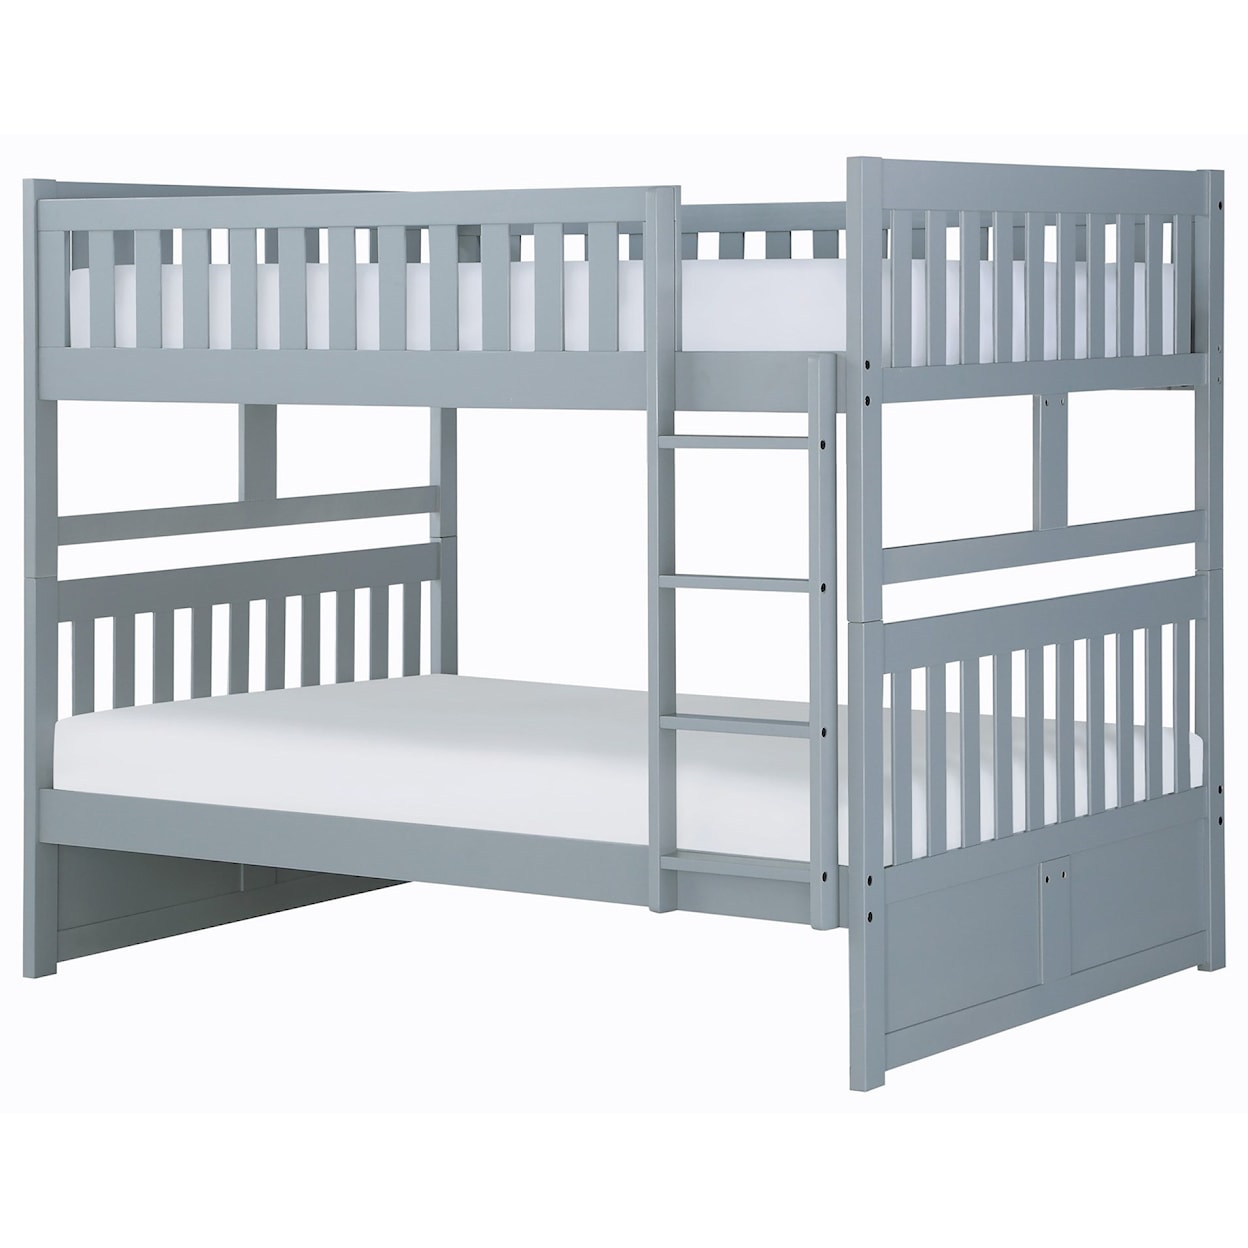 Homelegance Furniture Discovery Full Over Full Bunk Bed